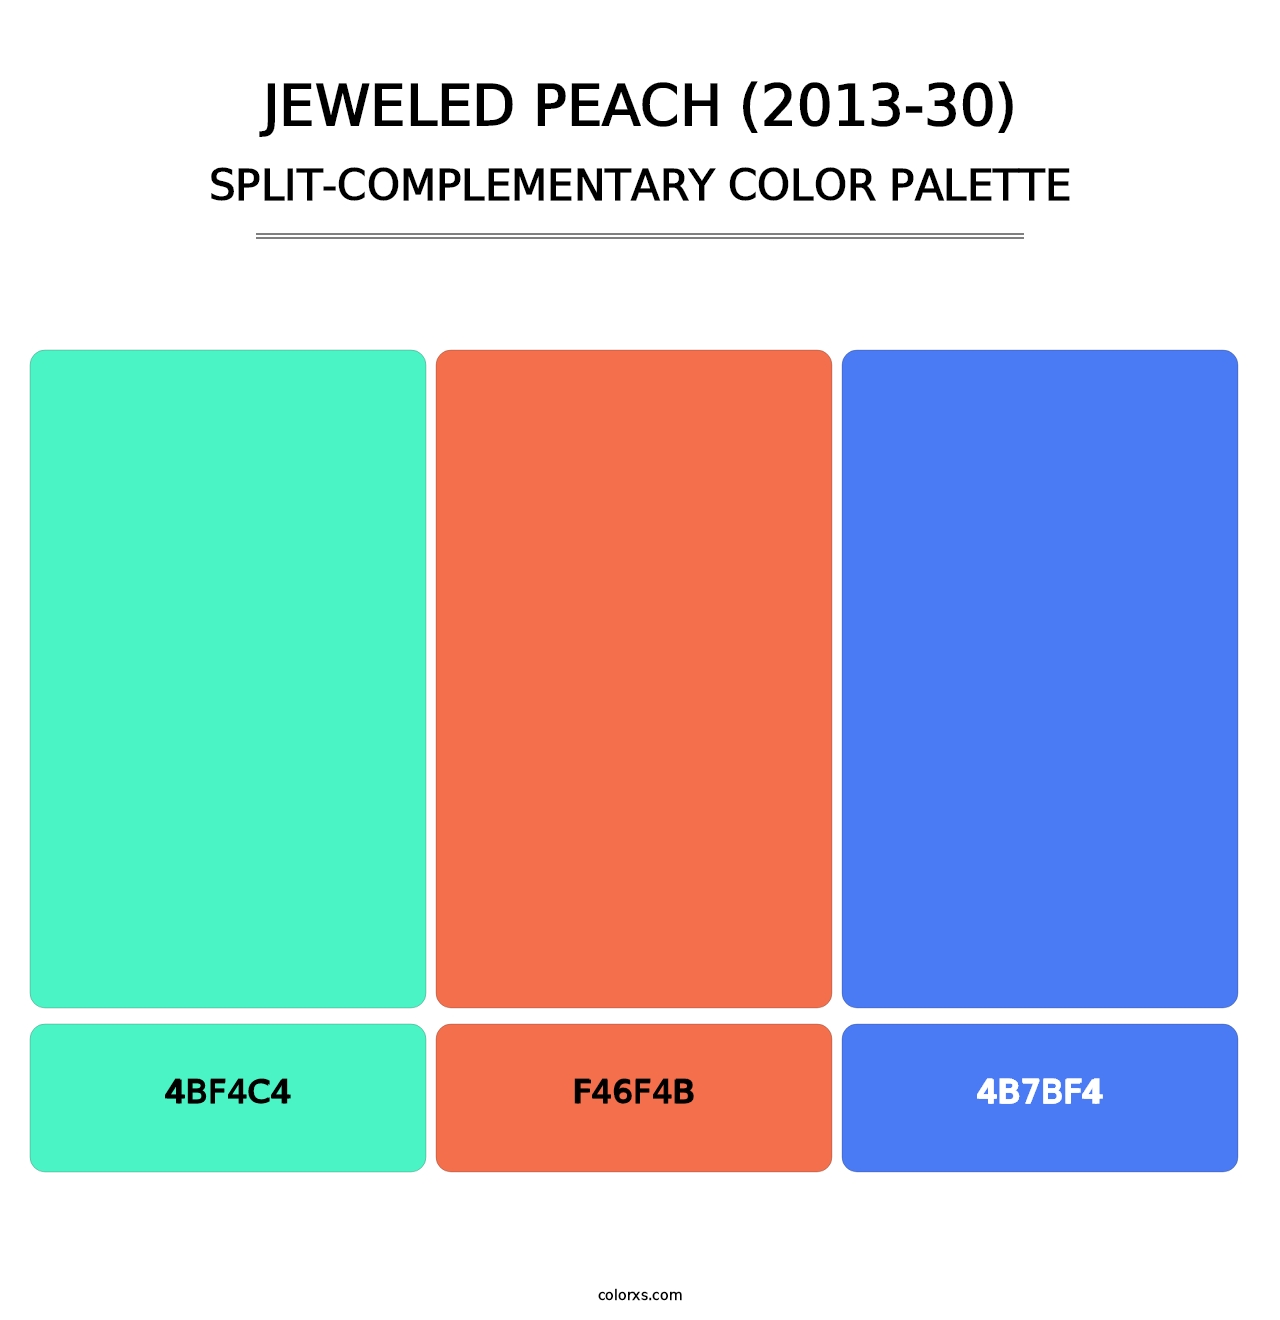 Jeweled Peach (2013-30) - Split-Complementary Color Palette